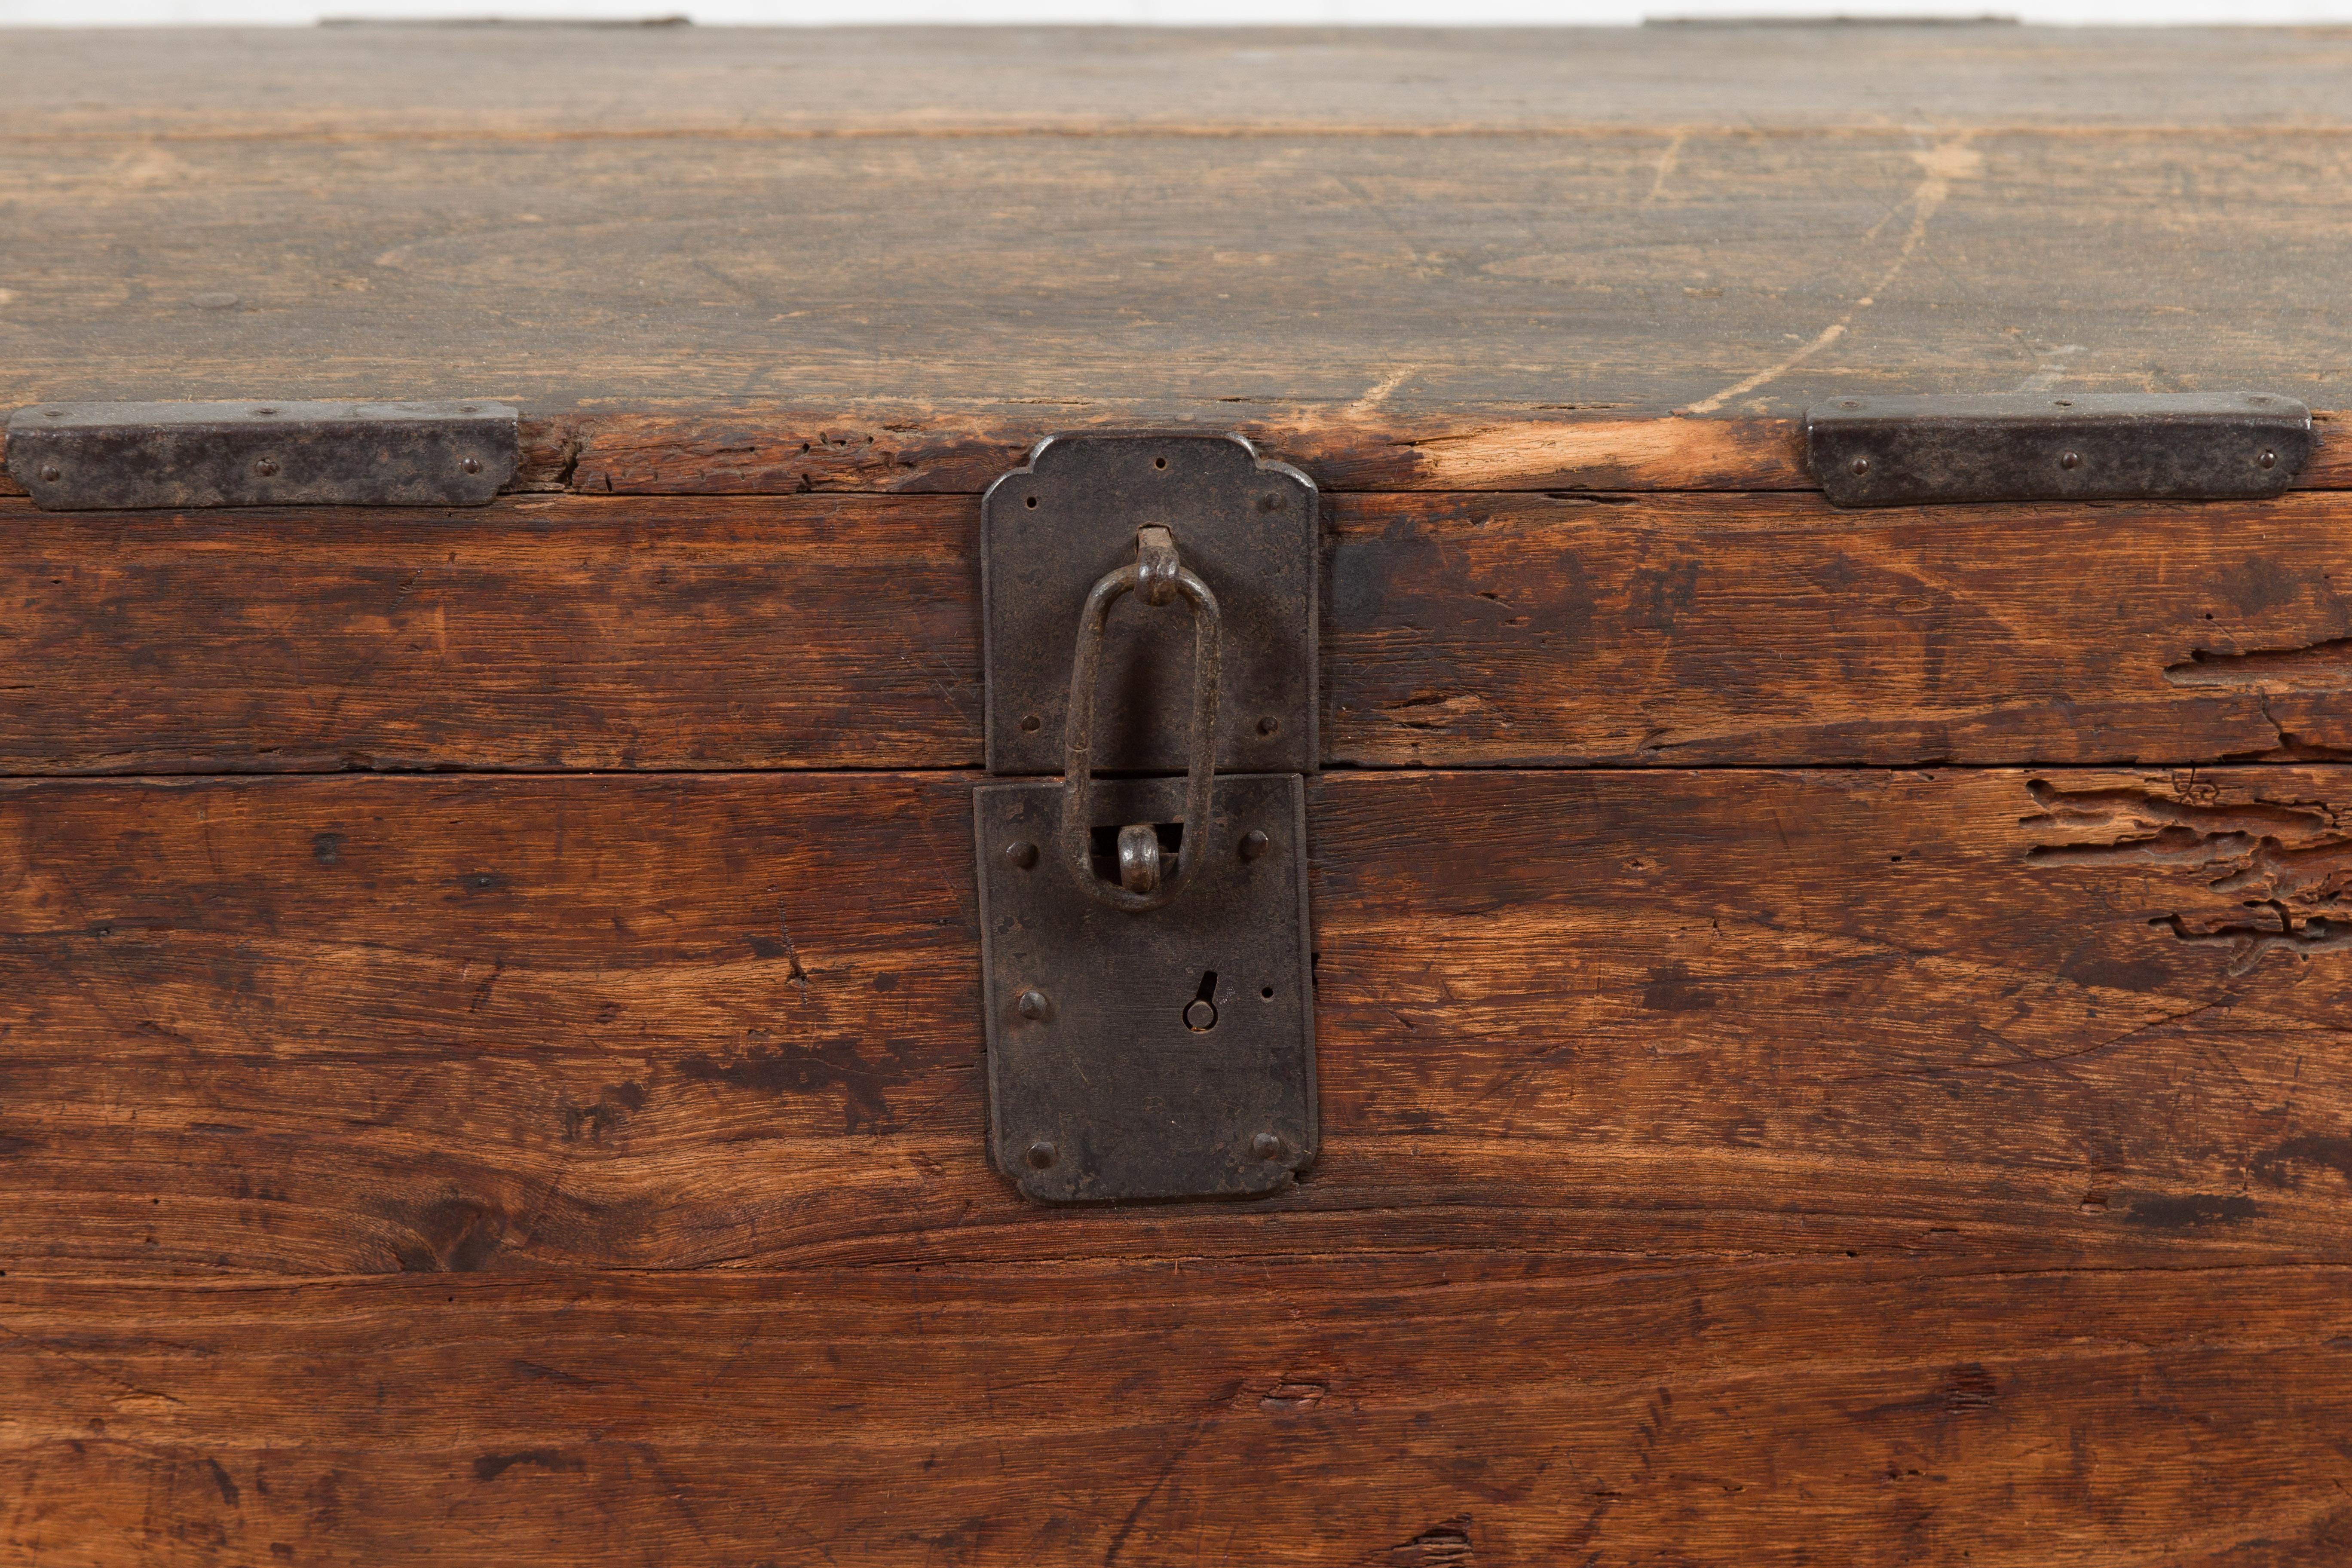 Japanese Meiji Period 19th Century Blanket Chest with Iron Hardware and Patina For Sale 7